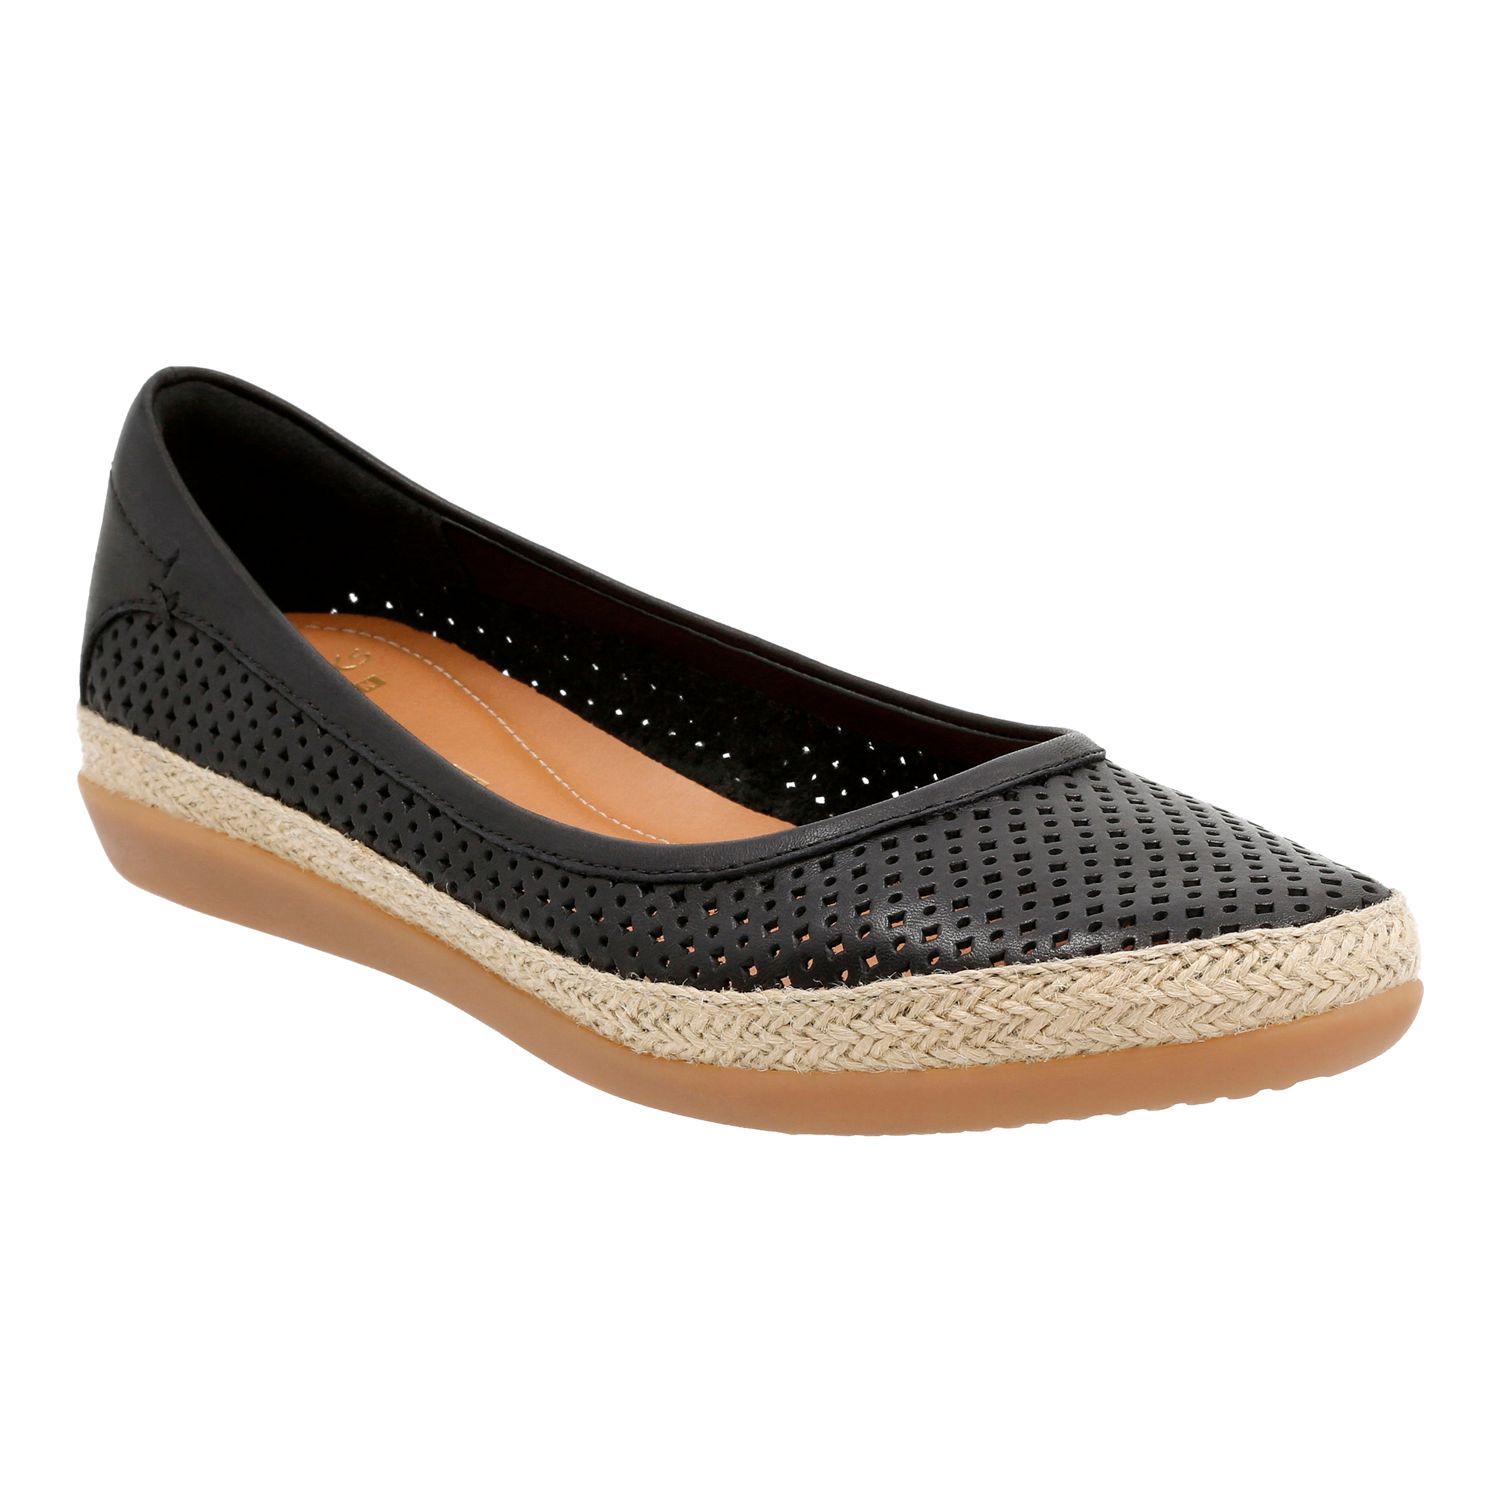 clarks danelly adira shoes